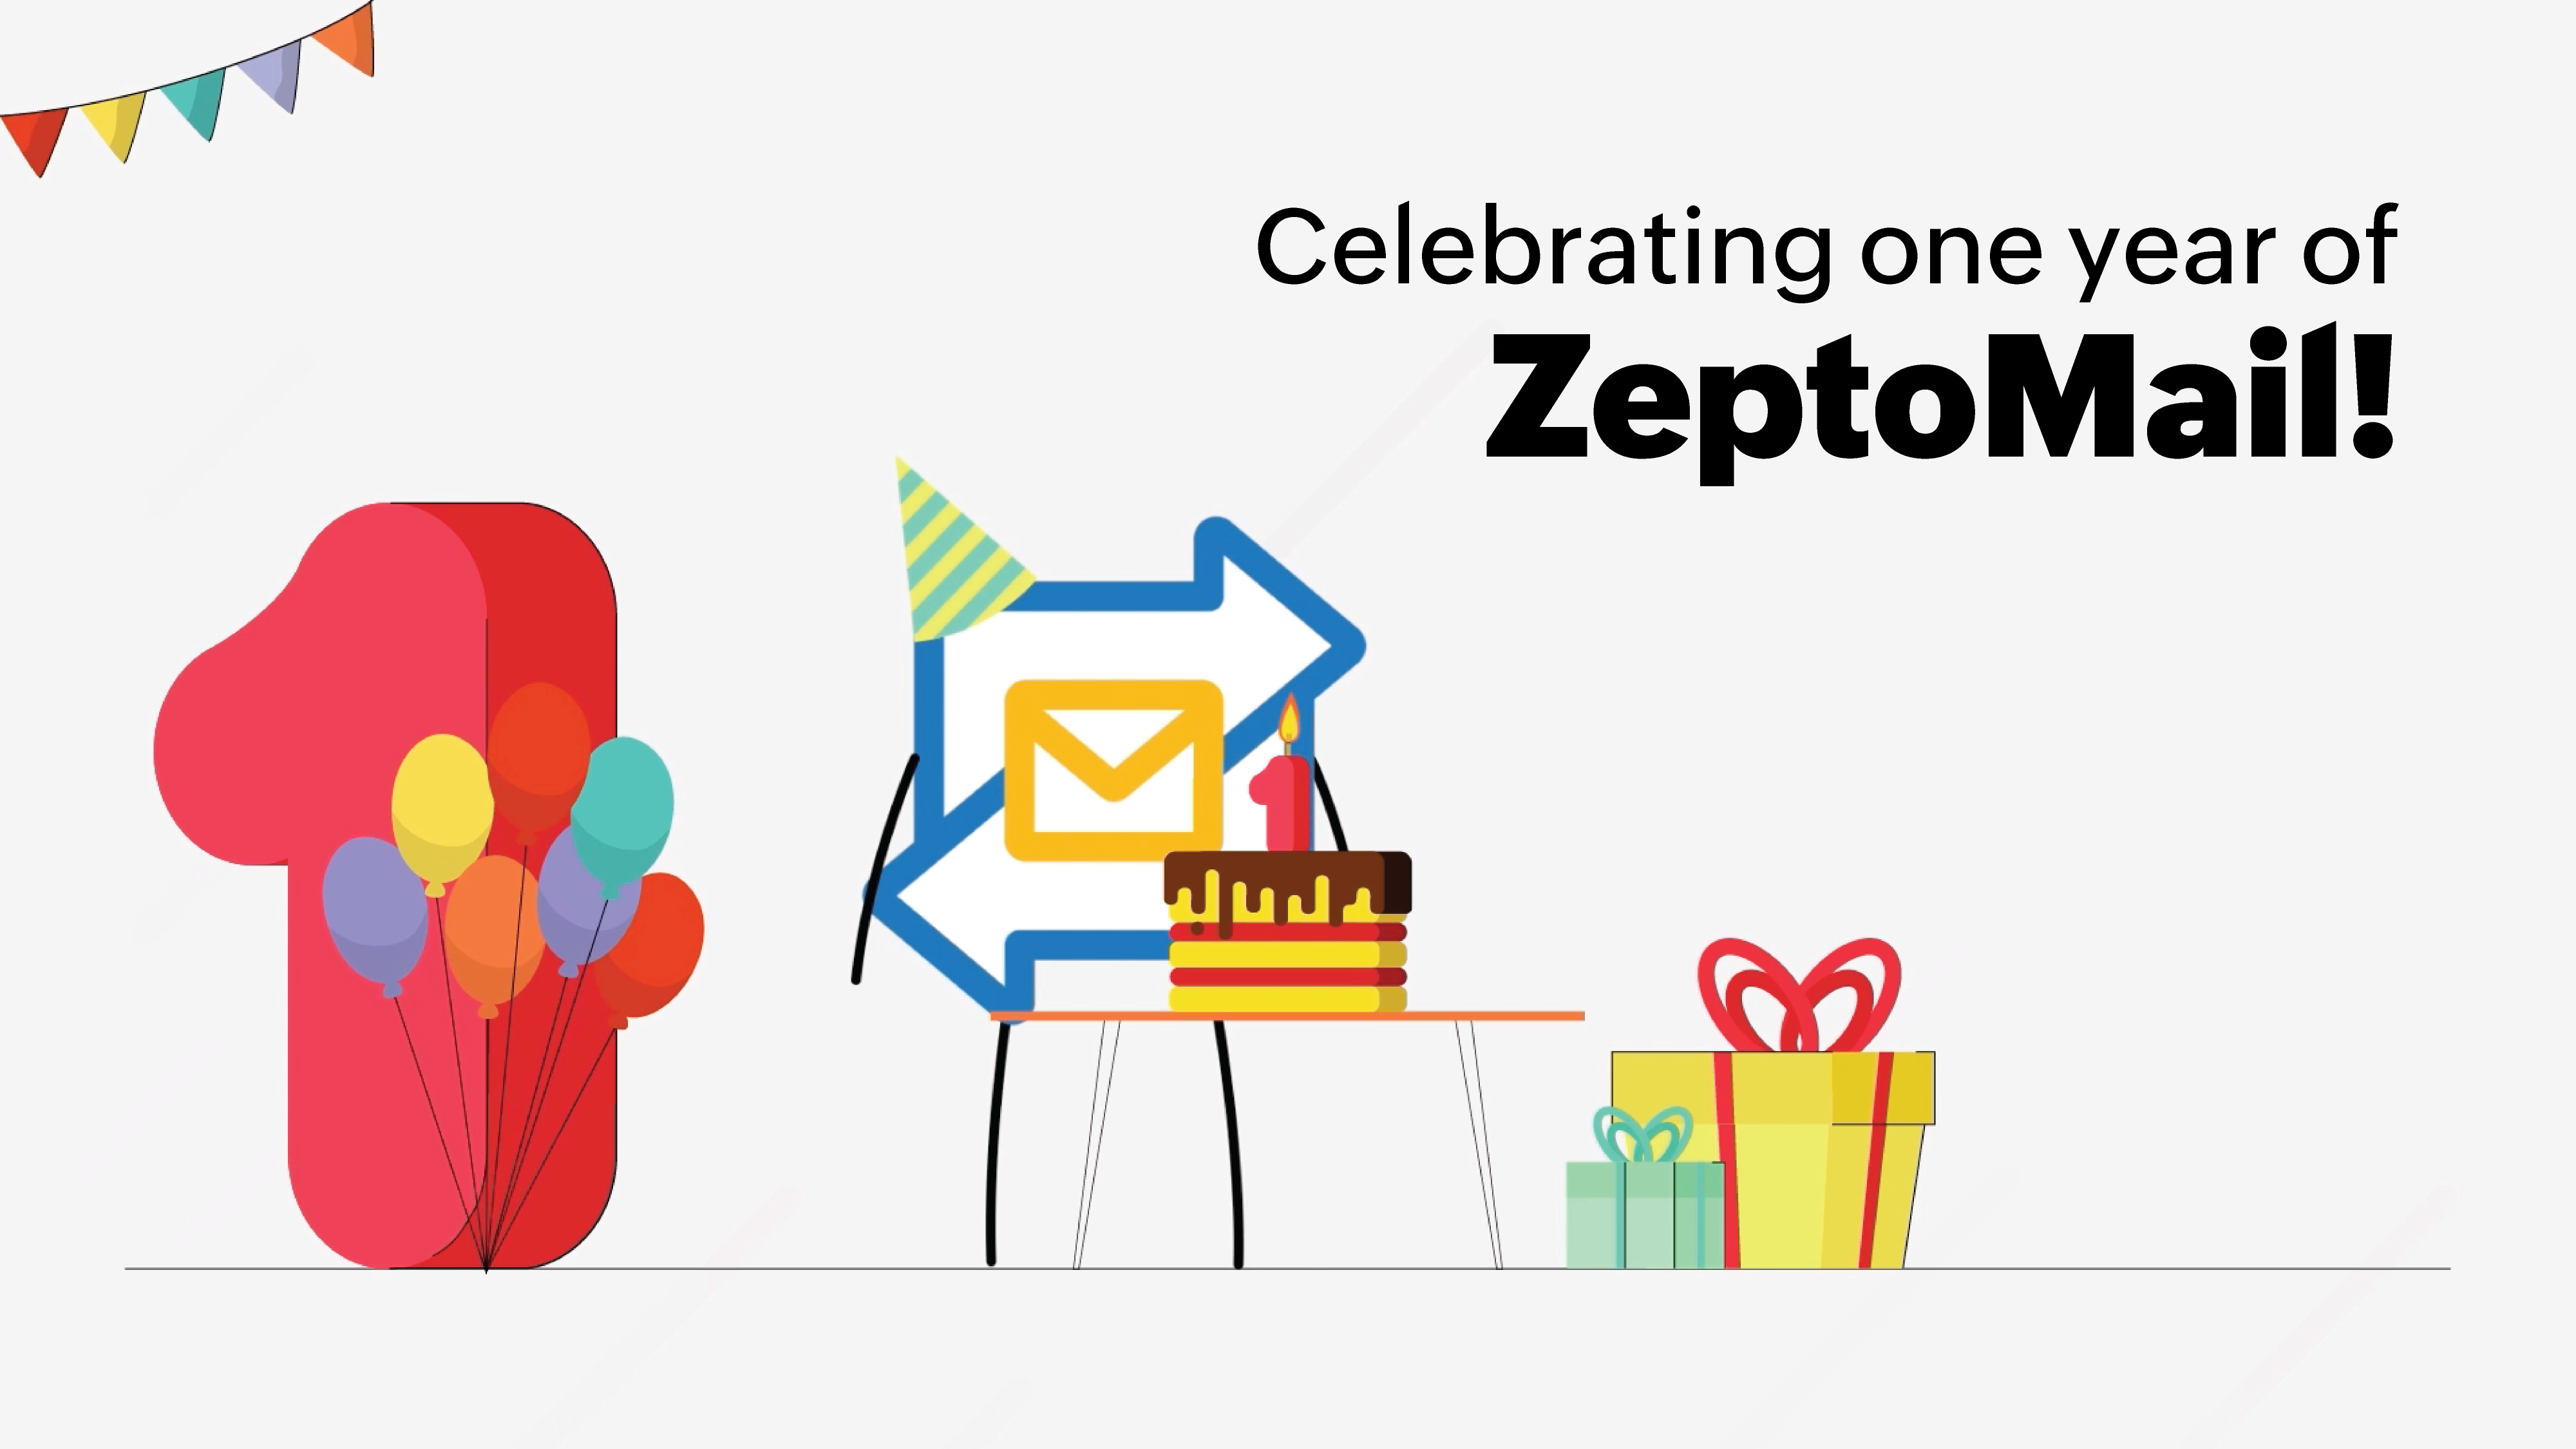 ZeptoMail turns one: our first year with ZeptoMail